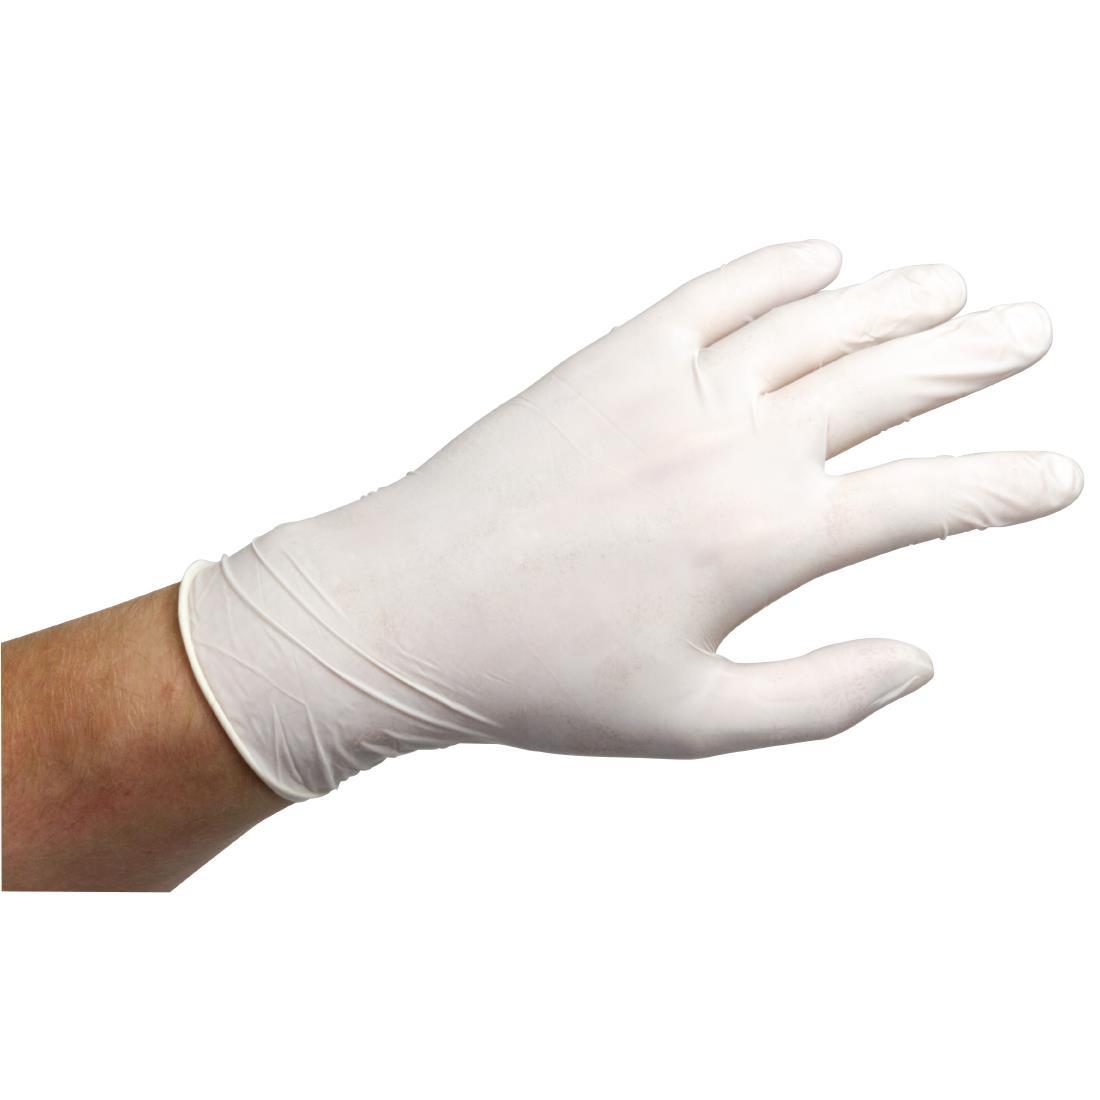 Powdered Latex Gloves Extra Large (Pack of 100) - A228-XL  - 2